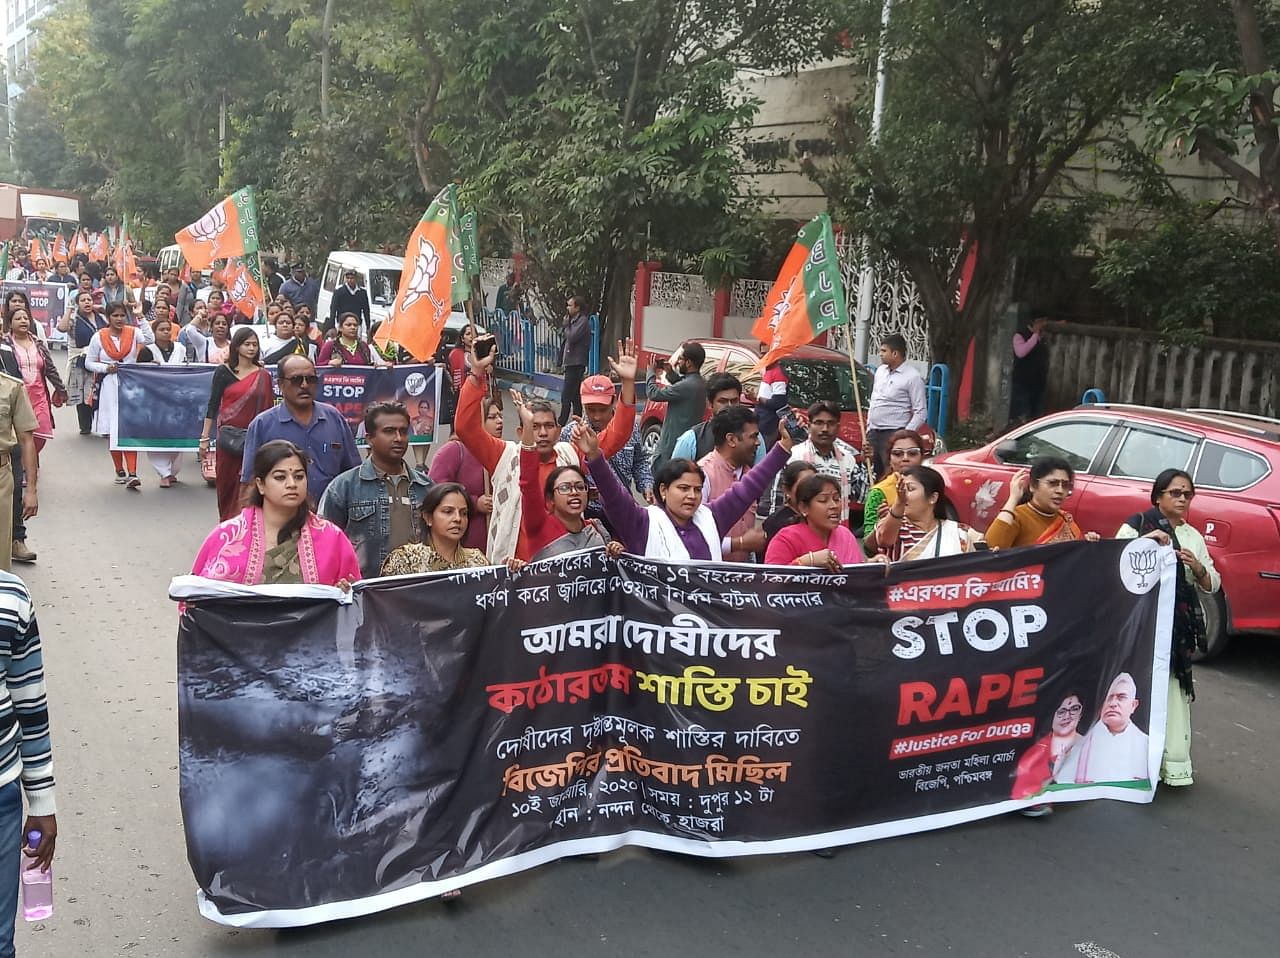 The rally, which commenced from Nandan area - the city's cultural hub - was led by West Bengal BJP Mahila Morcha president and MP Locket Chatterjee and the party's general secretary Raju Banerjee. Credit: Twitter (@BJP4Bengal)